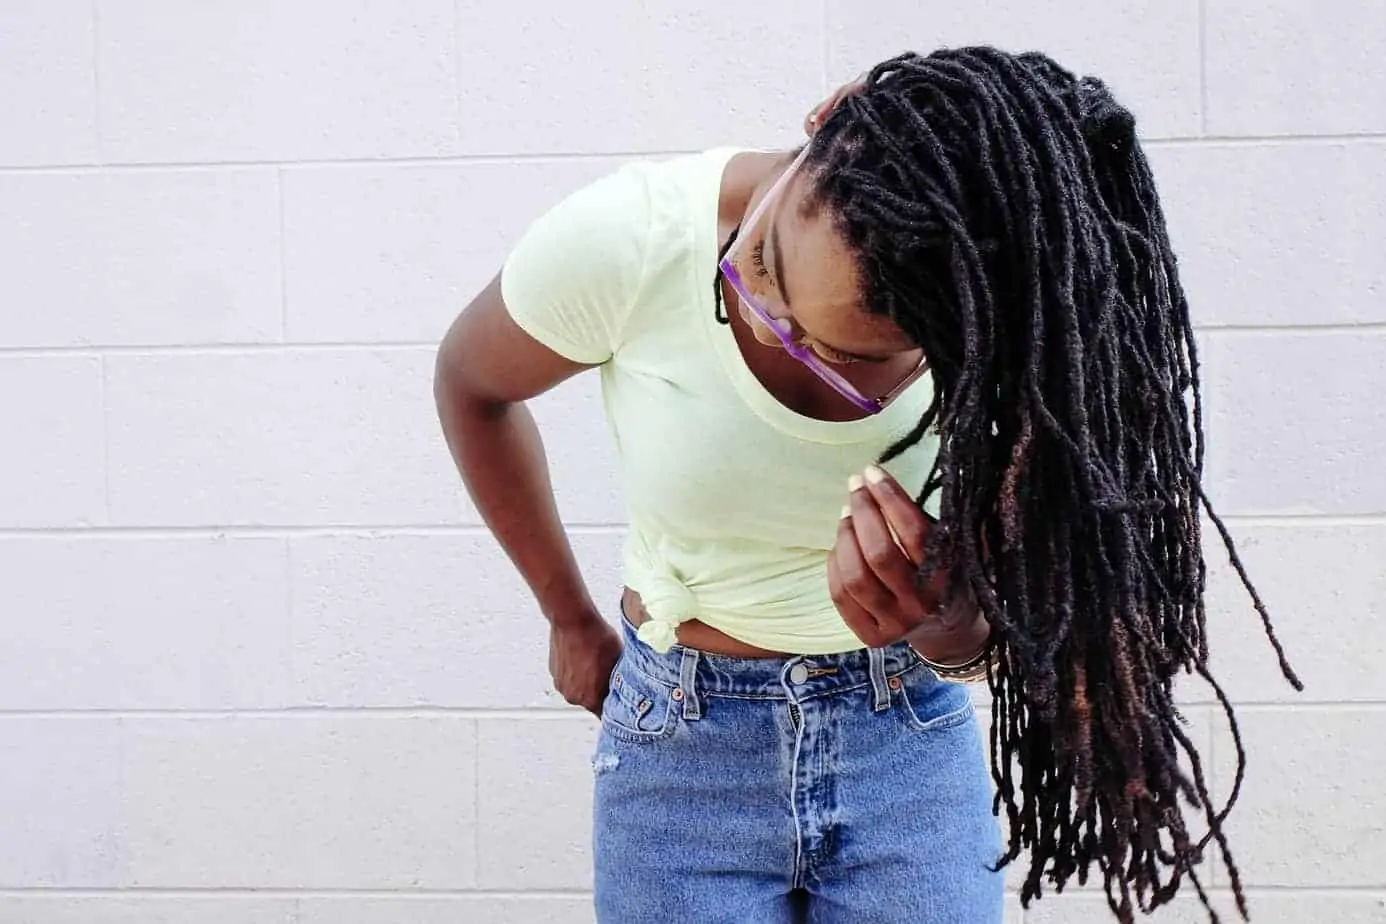 Judge Rules That Dreadlocks Ban in the Workplace is Legal  Teen Vogue